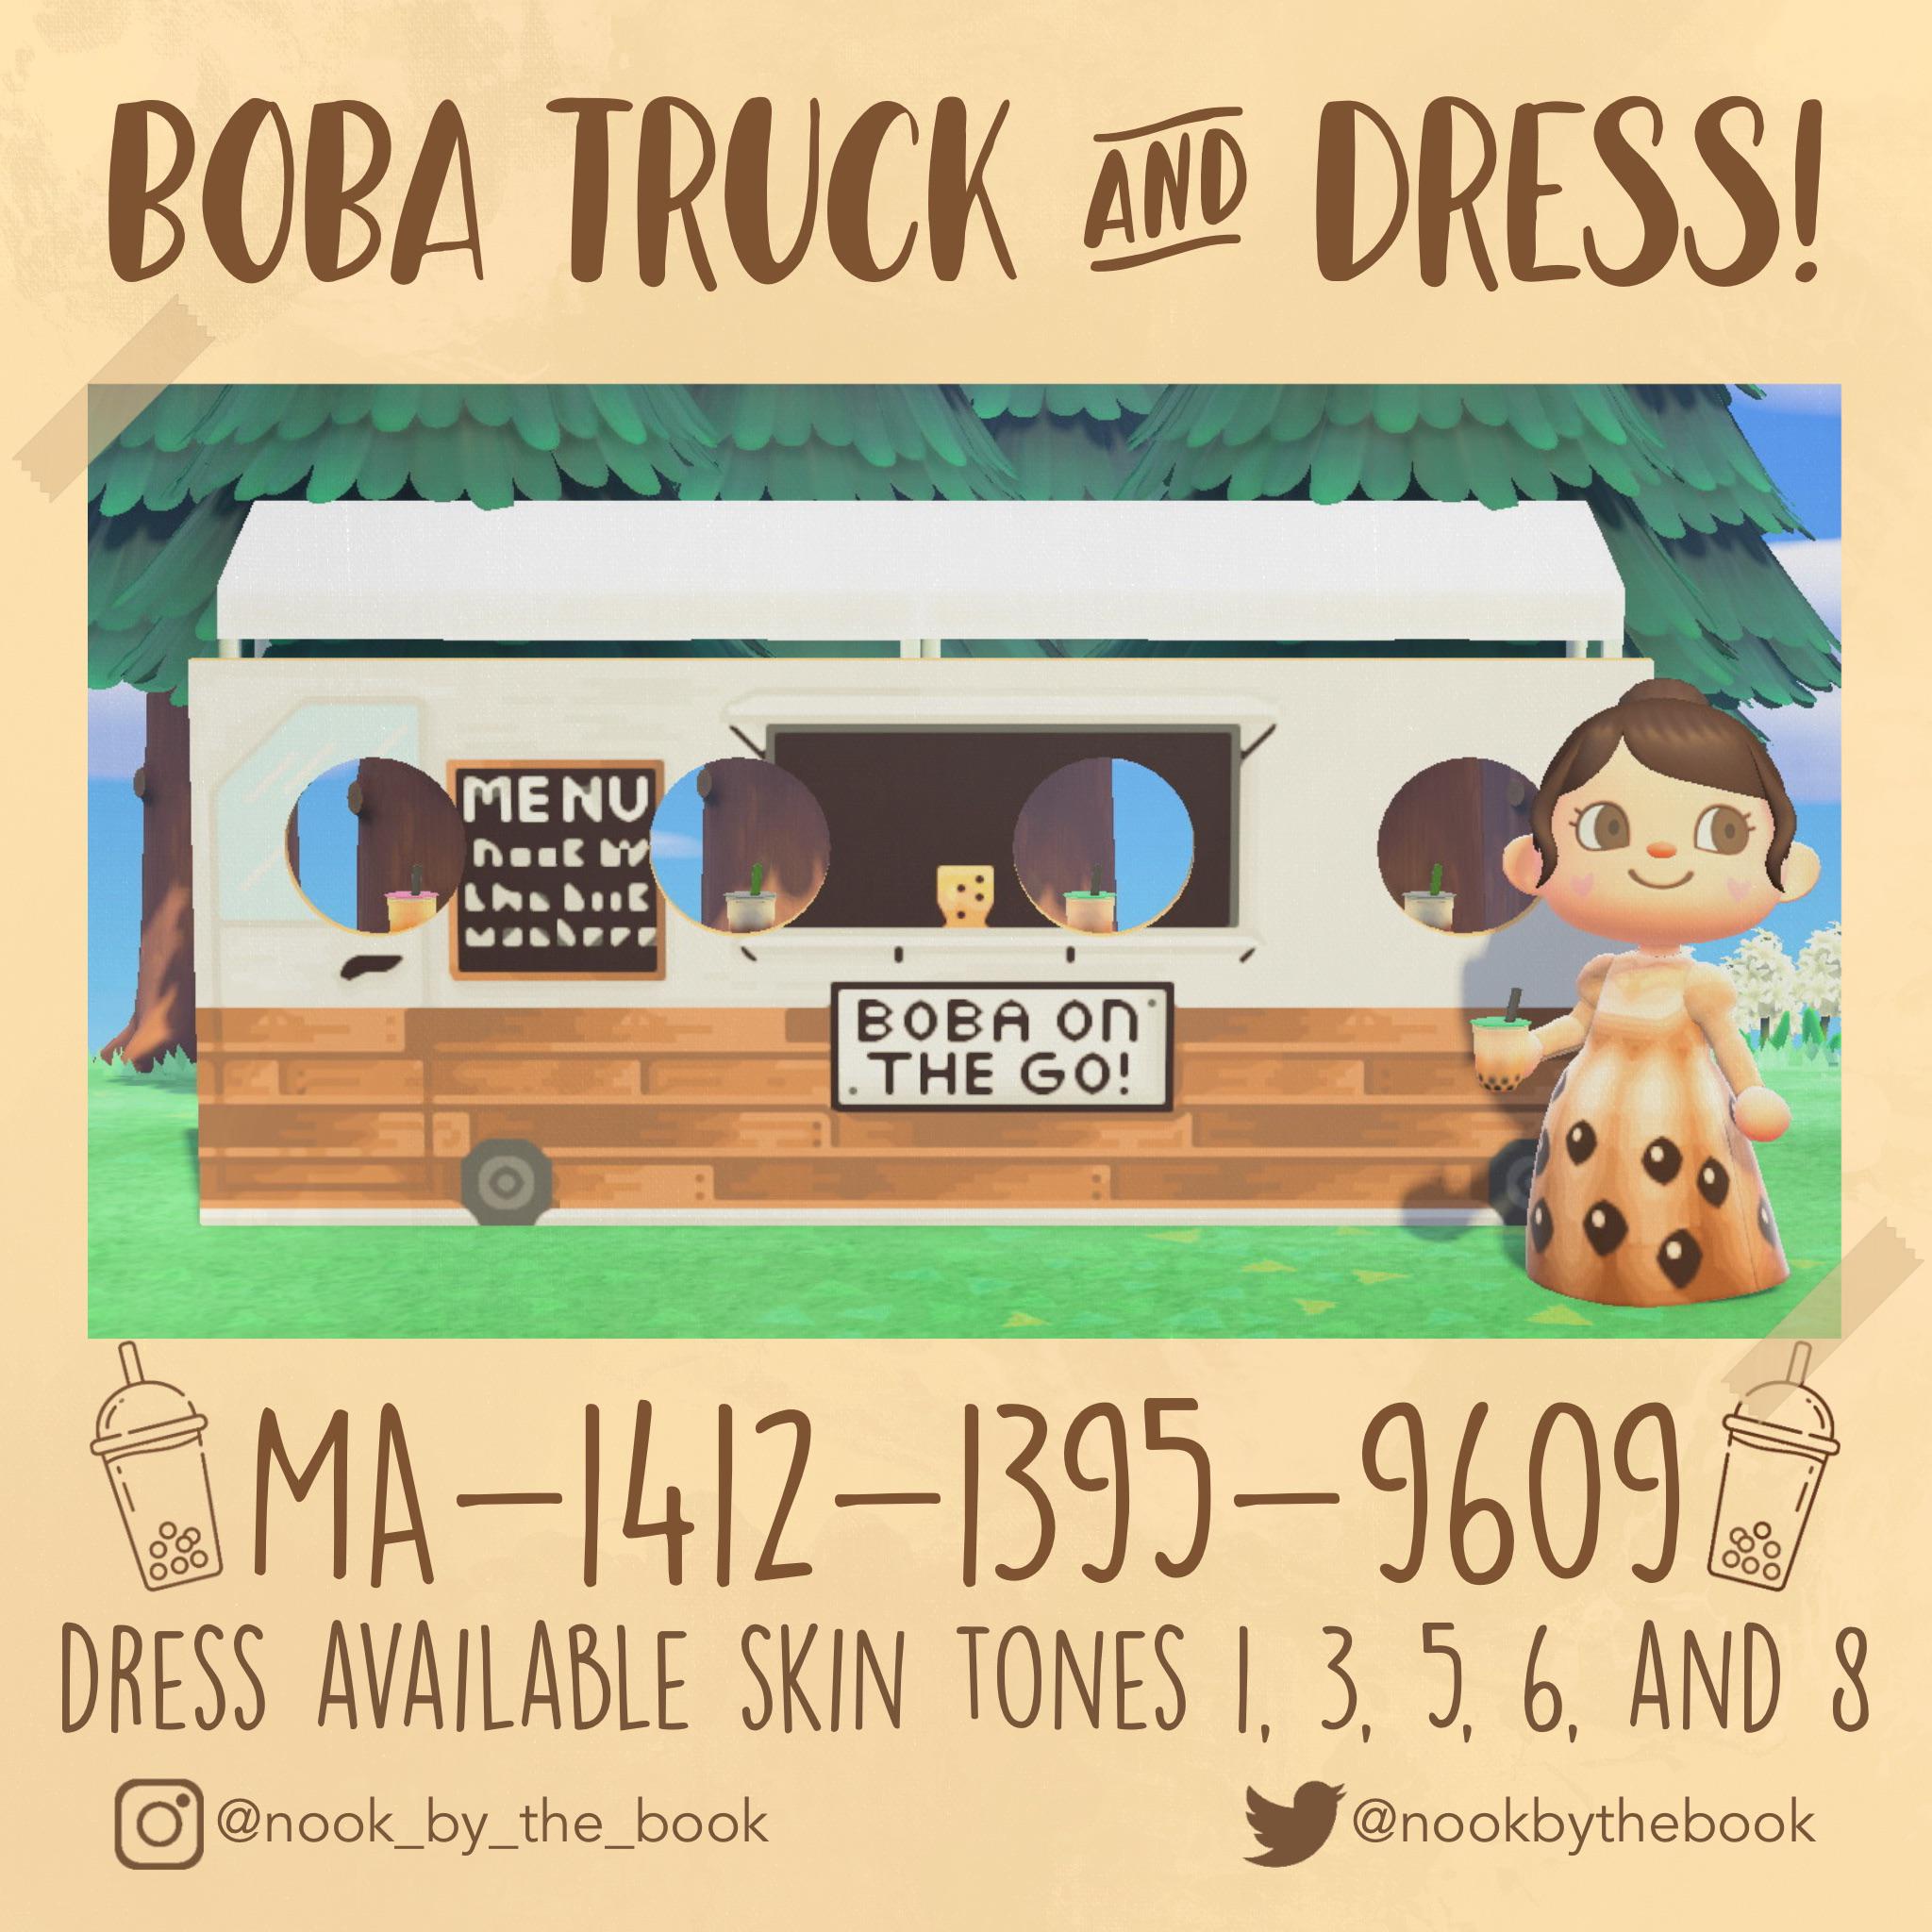 Animal Crossing Made some boba designs for the new update